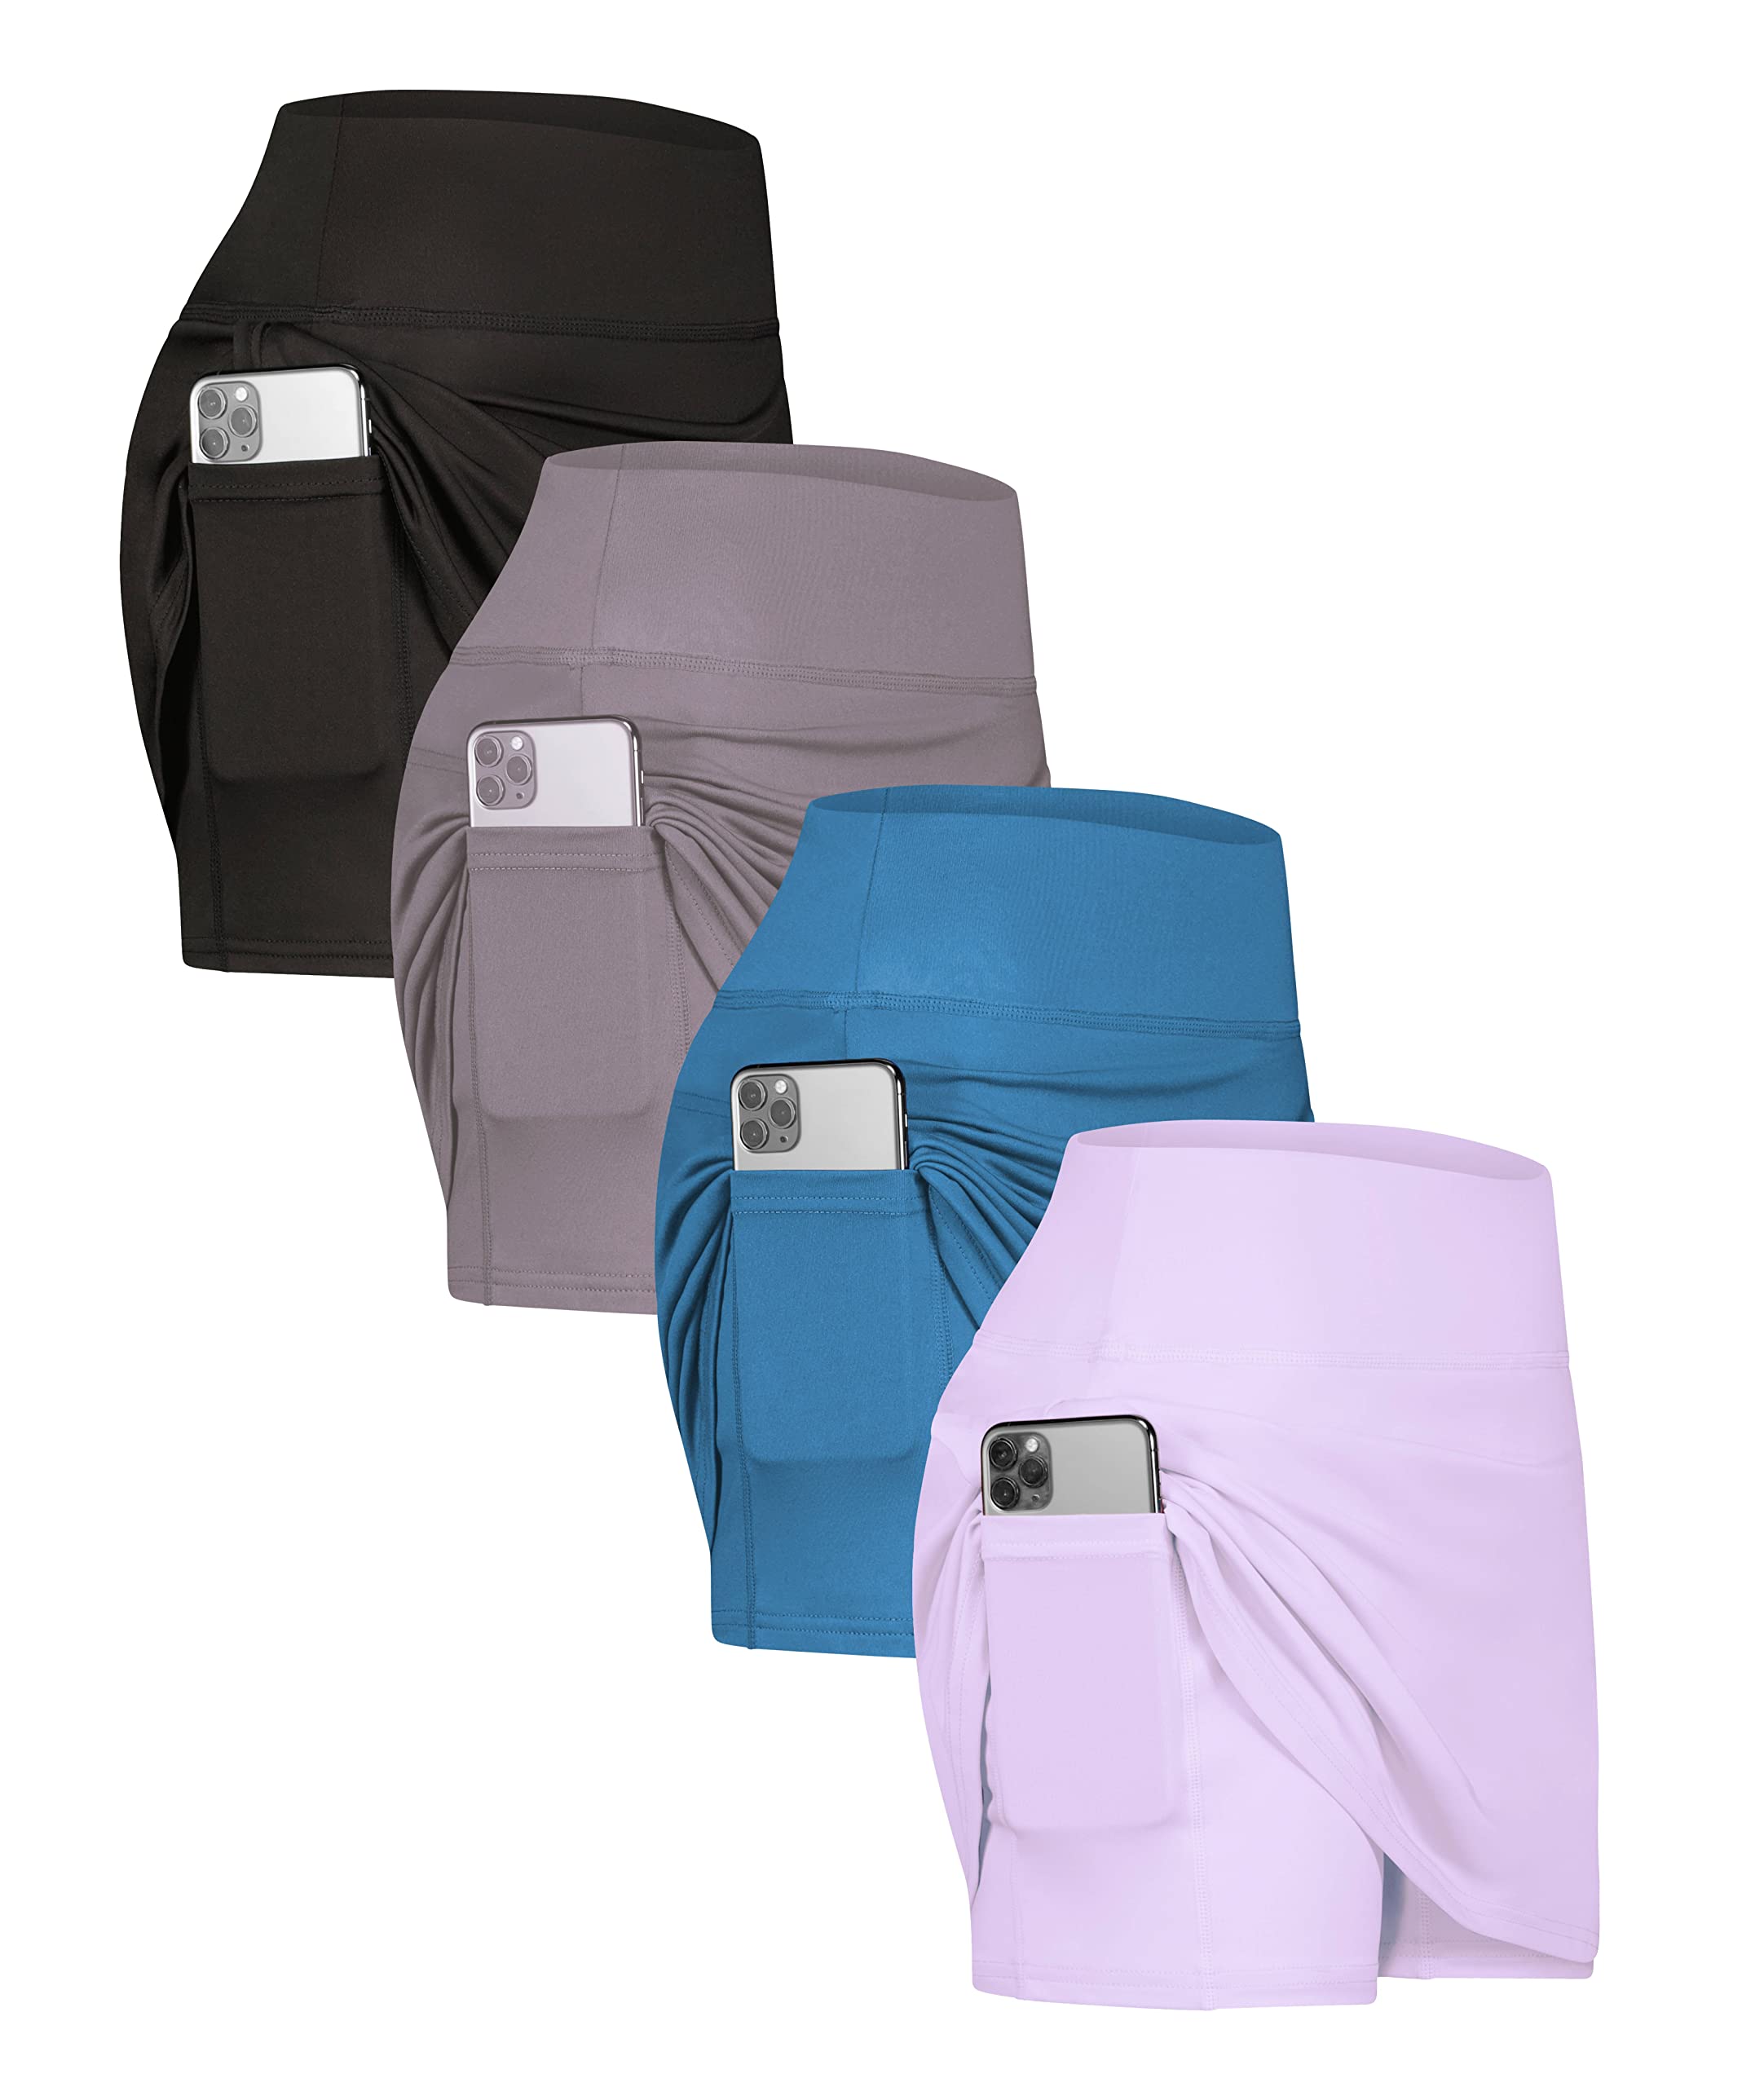 Real Essentials 4 Pack: Women's Active Skort Lightweight Comfy & Breathable Tennis Golf Skirt (Available in Plus Size)